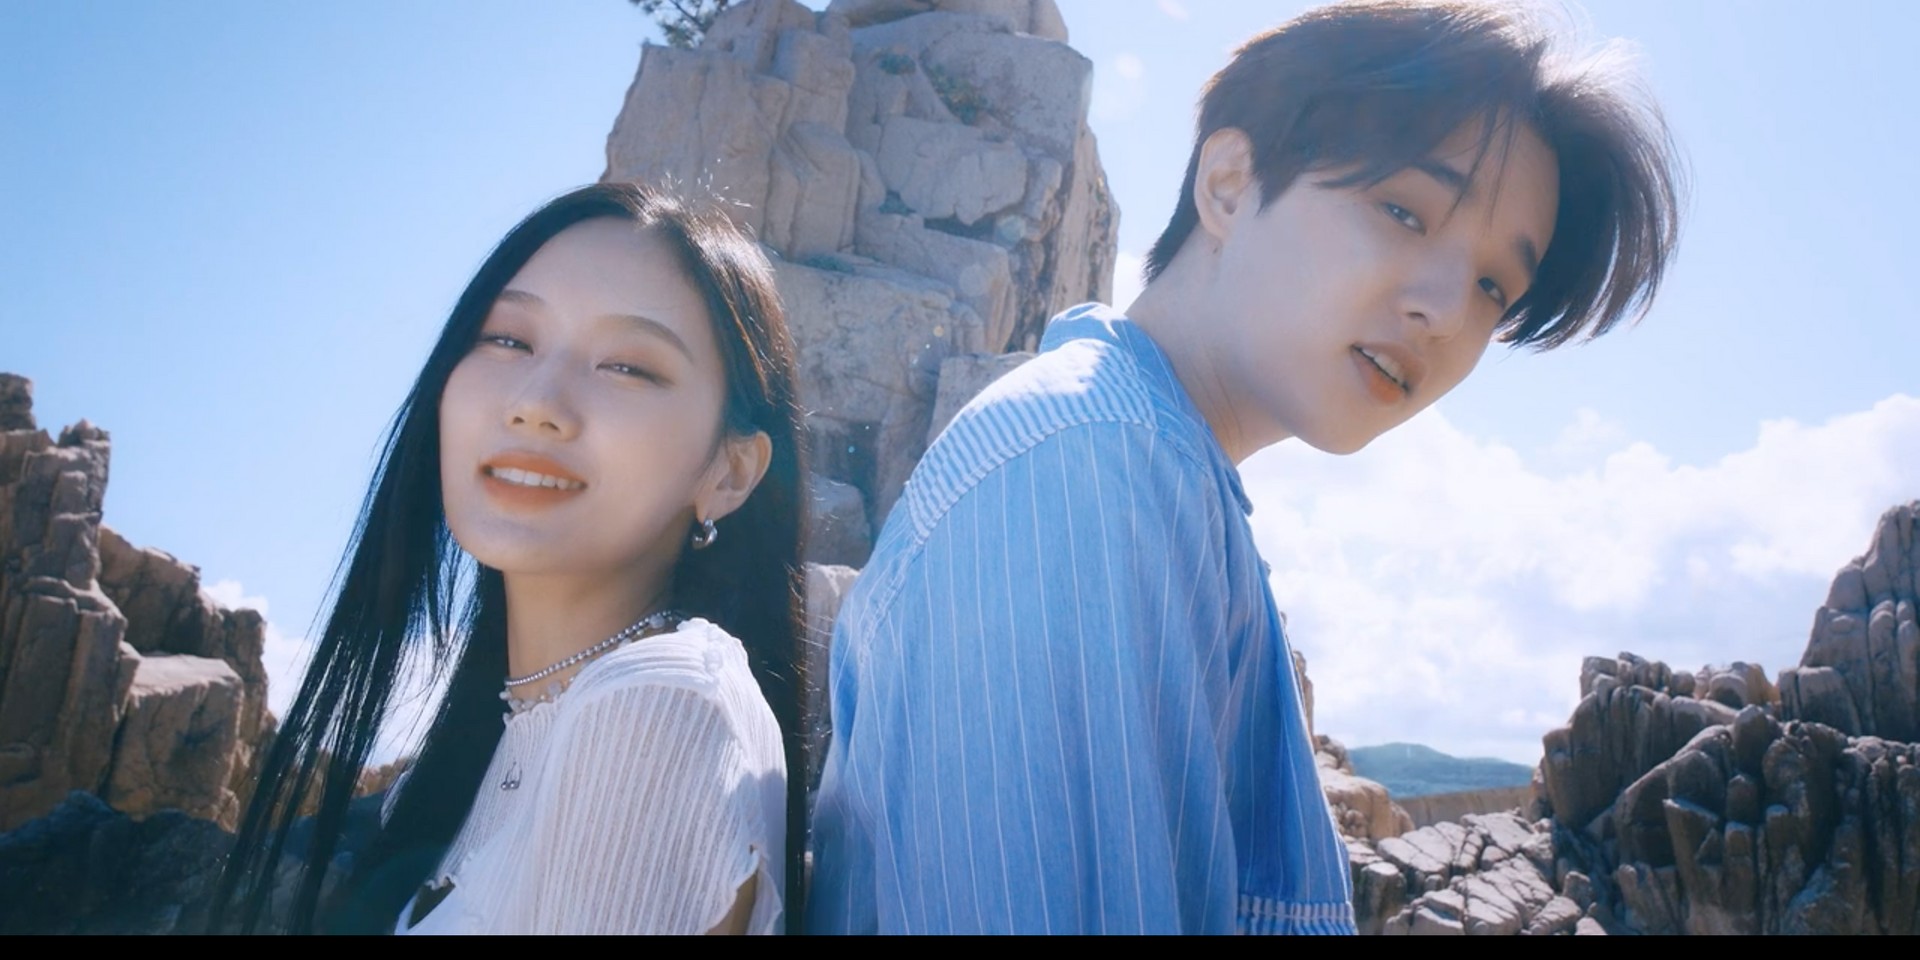 Seori and eaJ come together in new music video for 'Dive with you' – watch